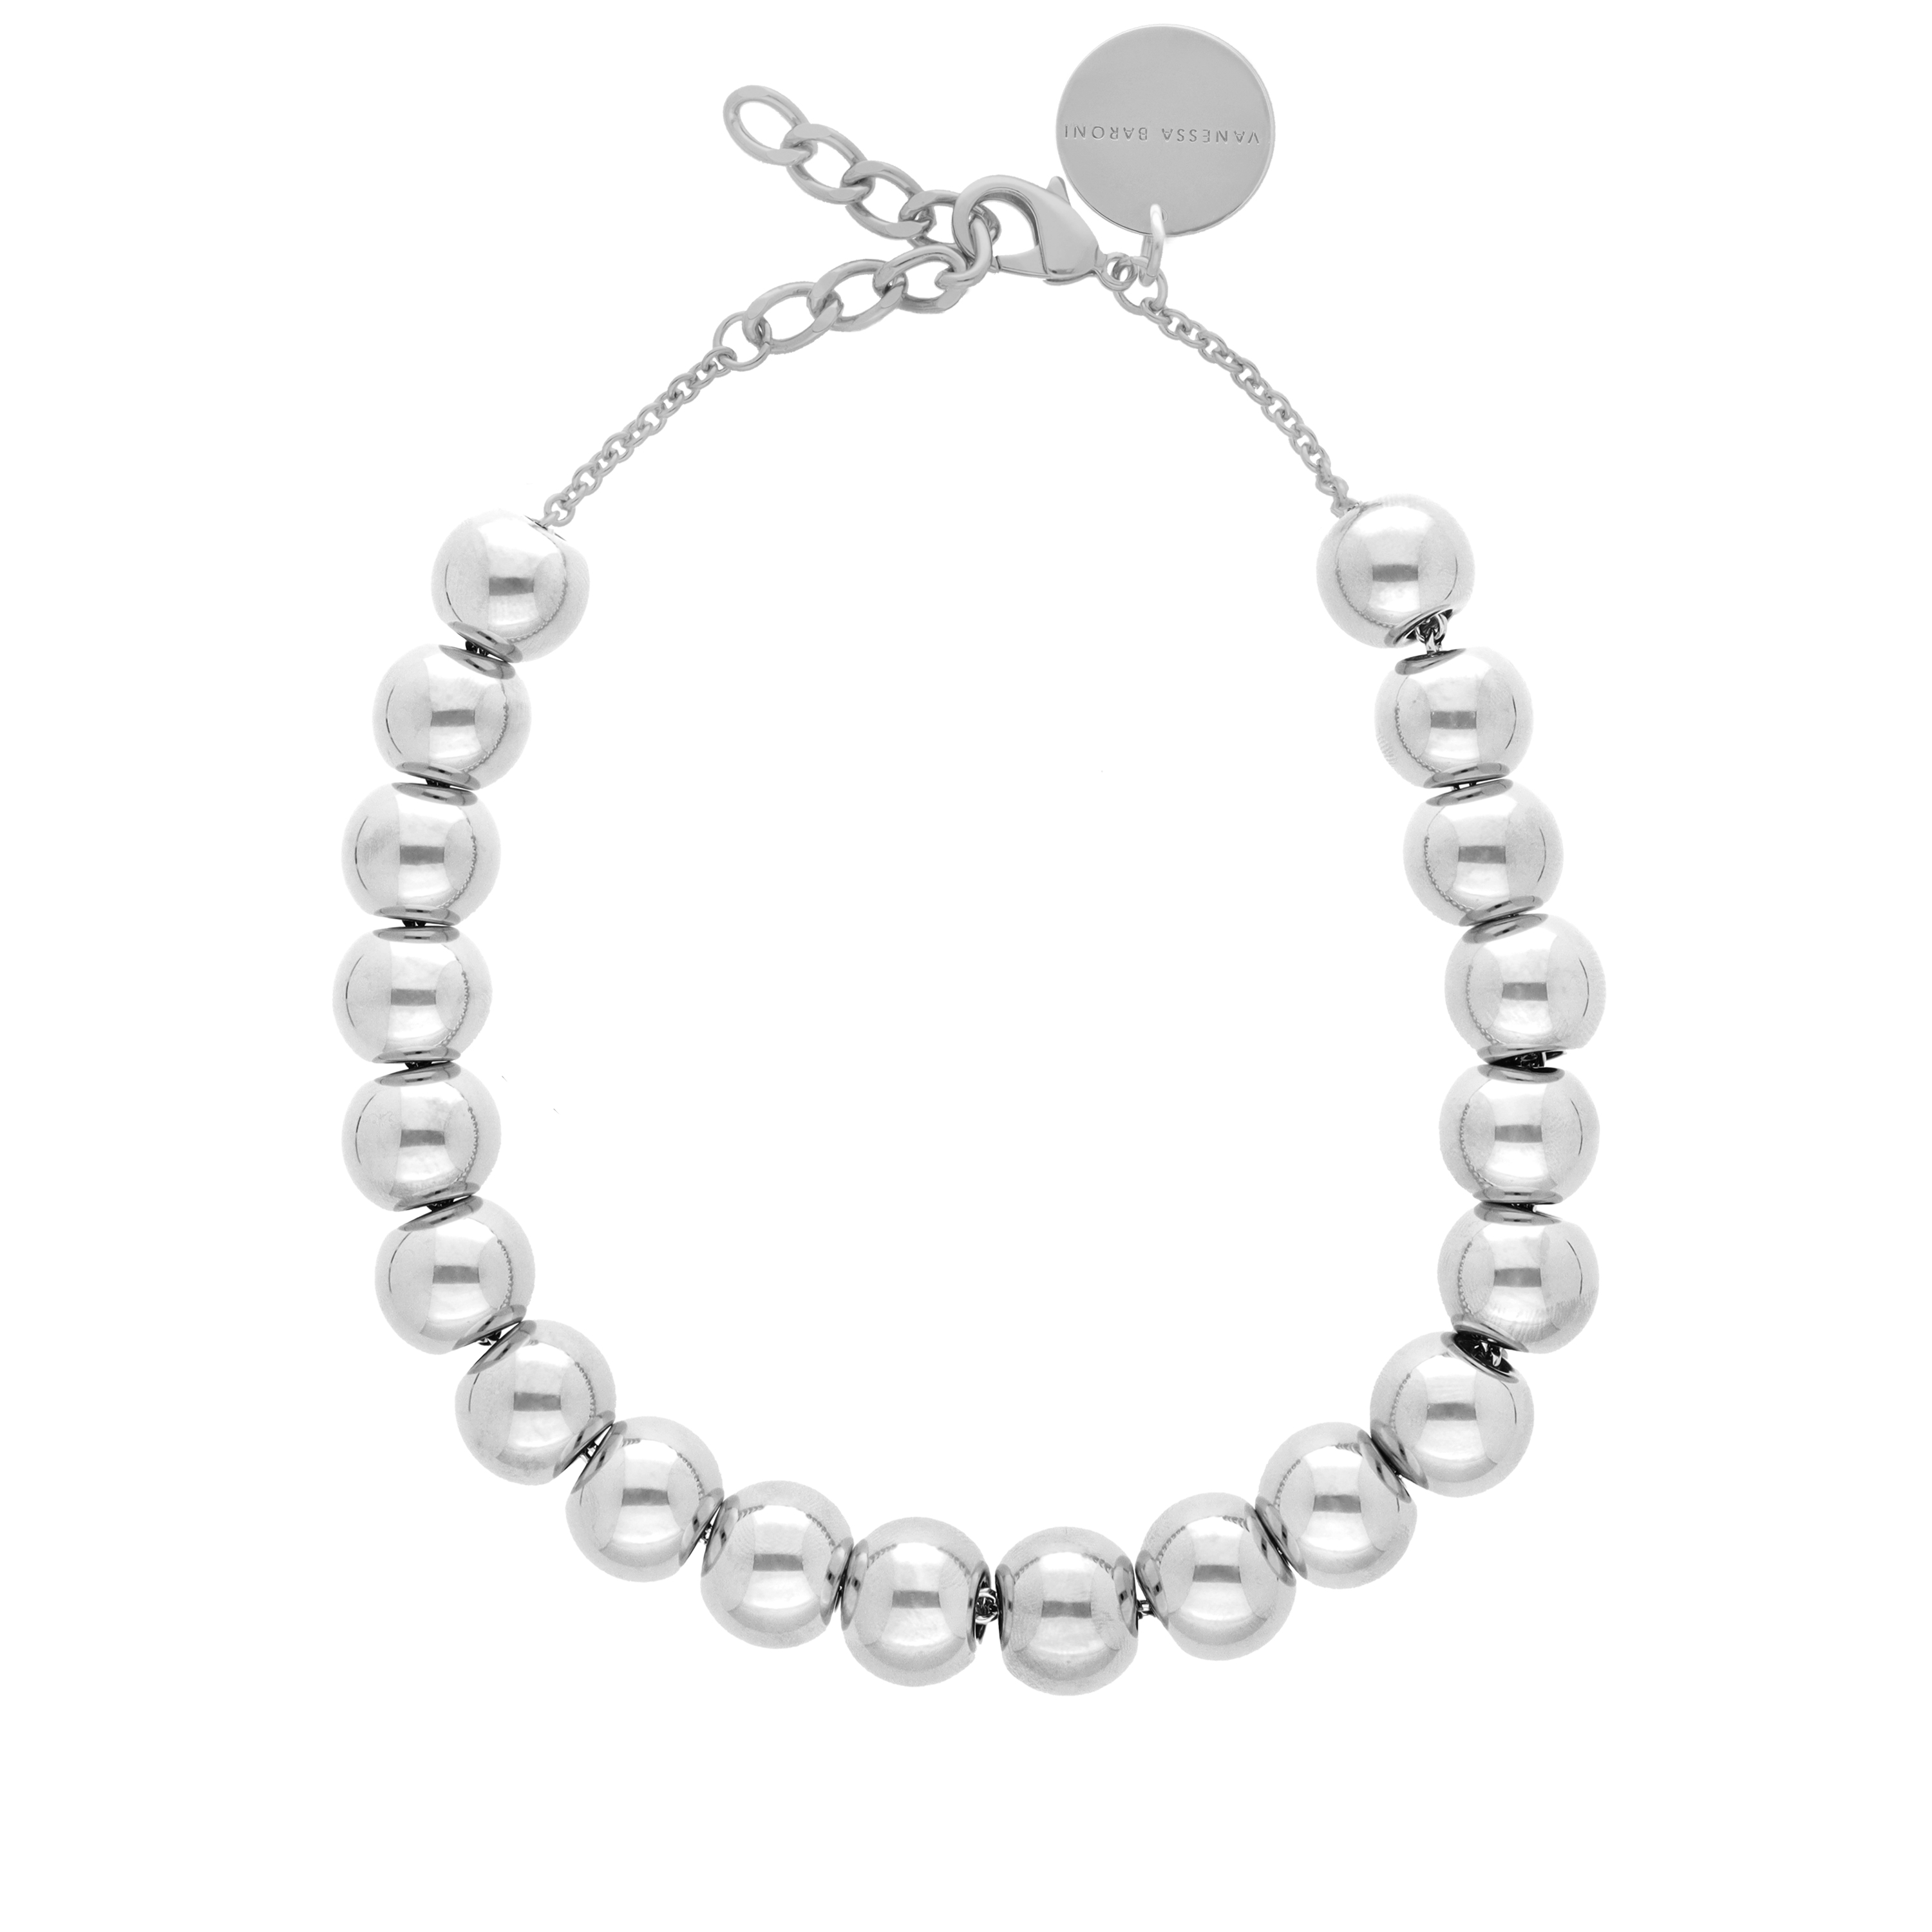 Small Beads Necklace Short Silver